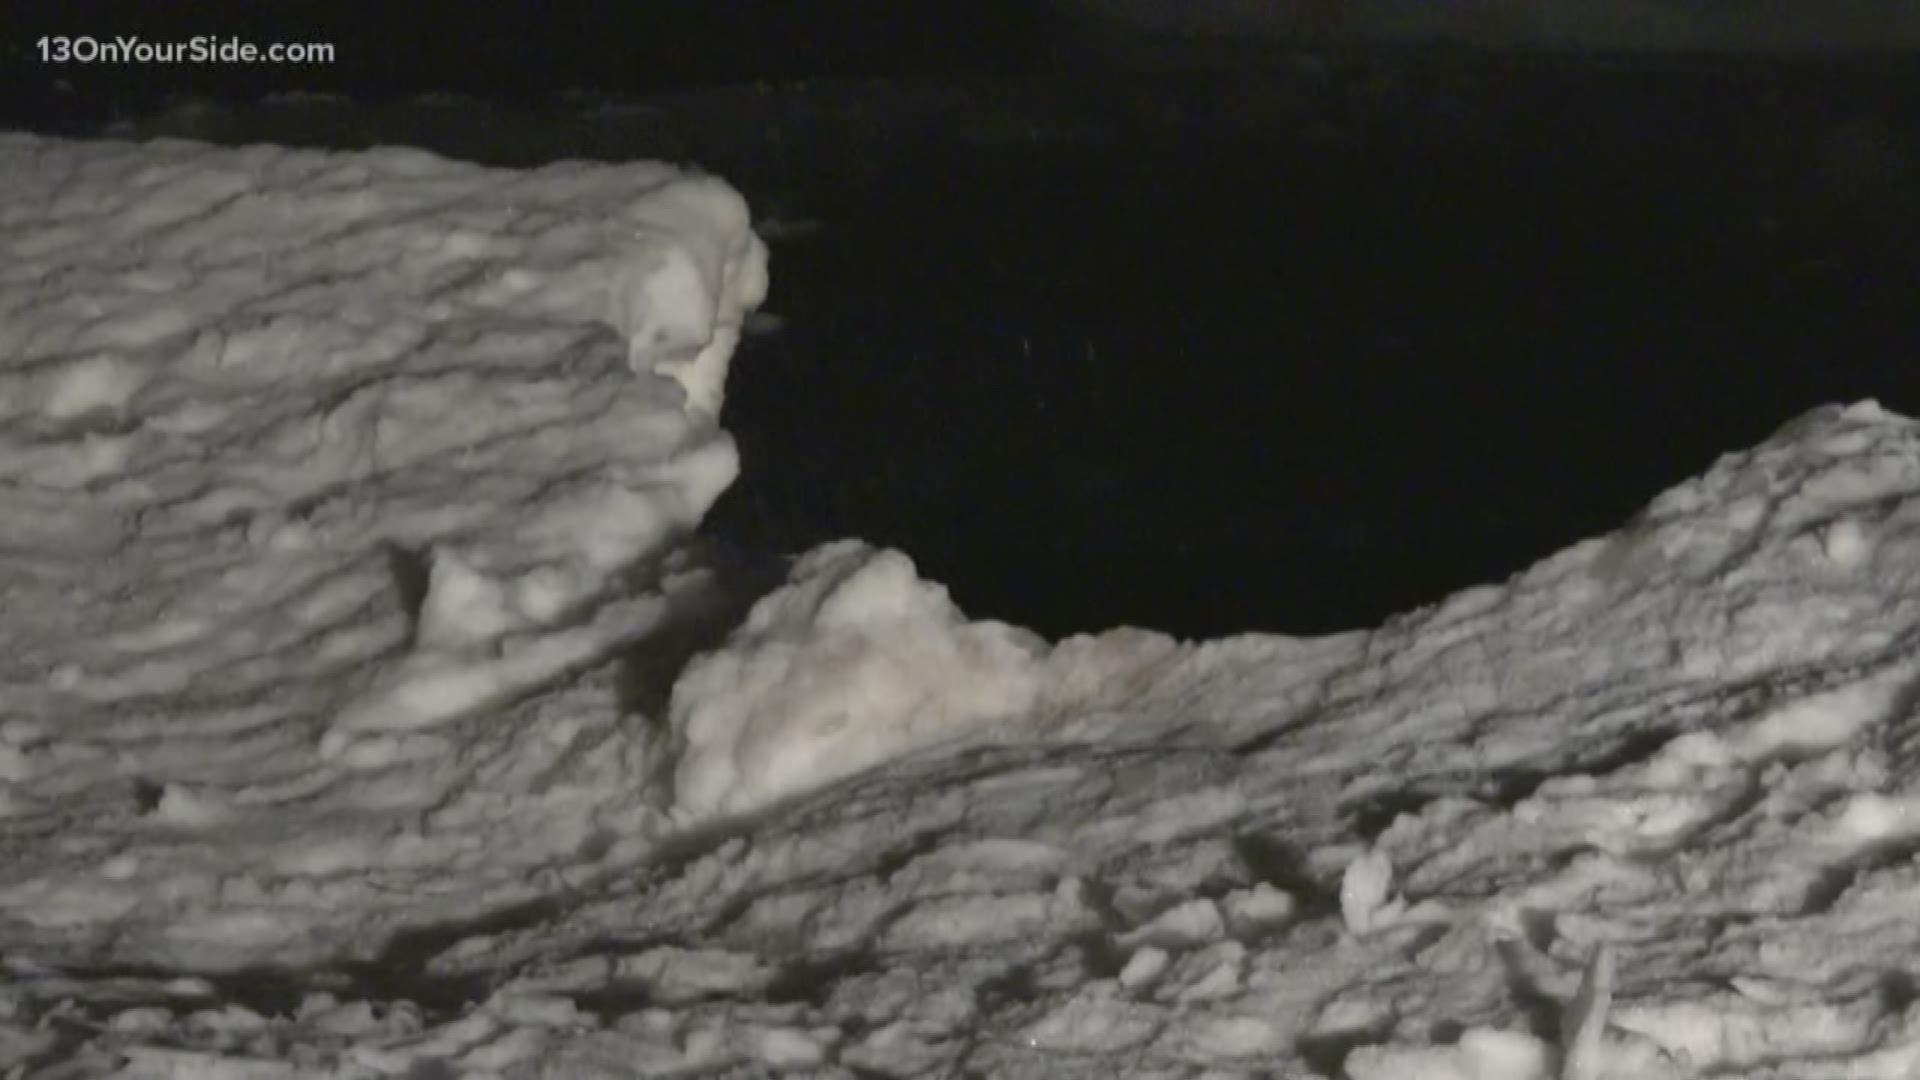 Crews were searching Lake Michigan Tuesday night on a report of a missing man but suspended it due to poor conditions.